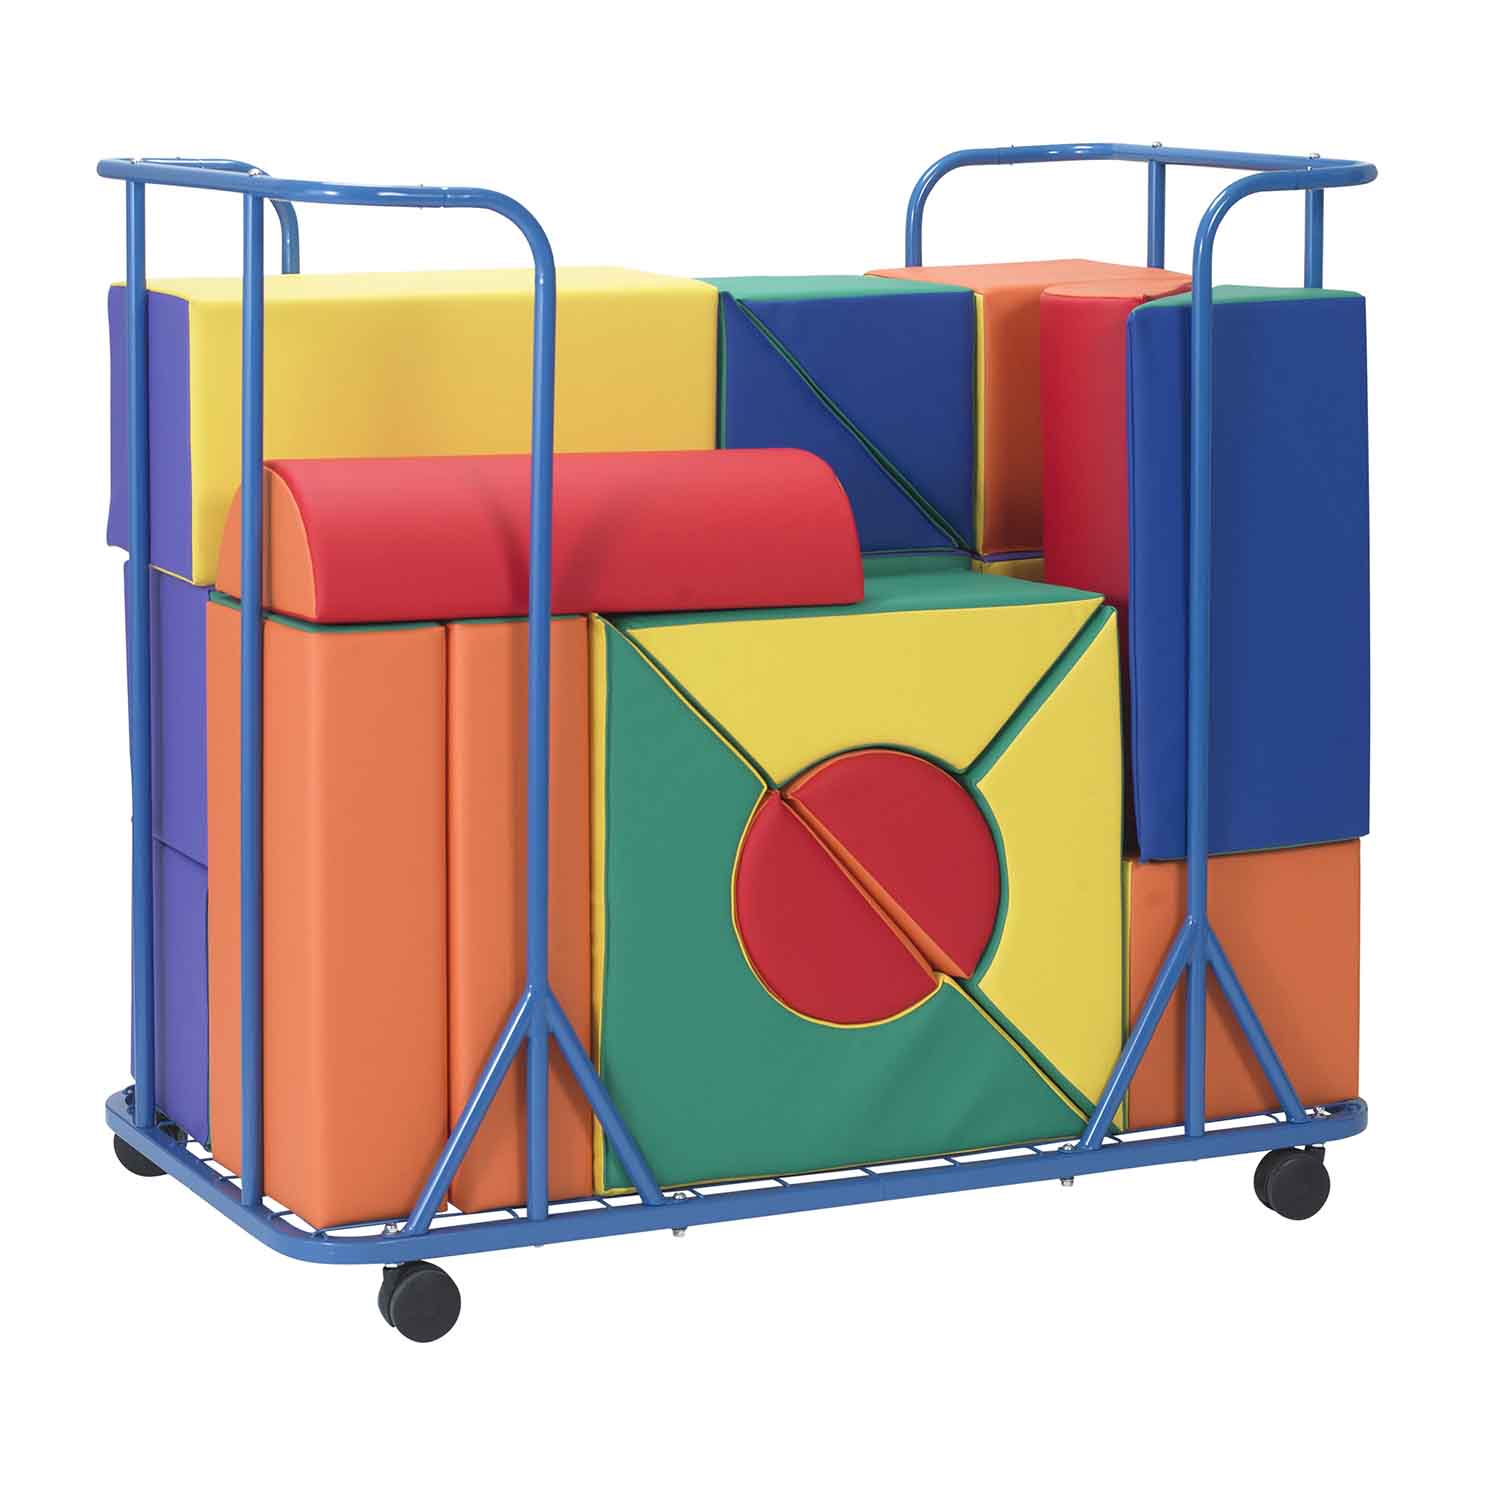 Buy Children's Factory® Mobile Drying Rack and Art Cart at S&S